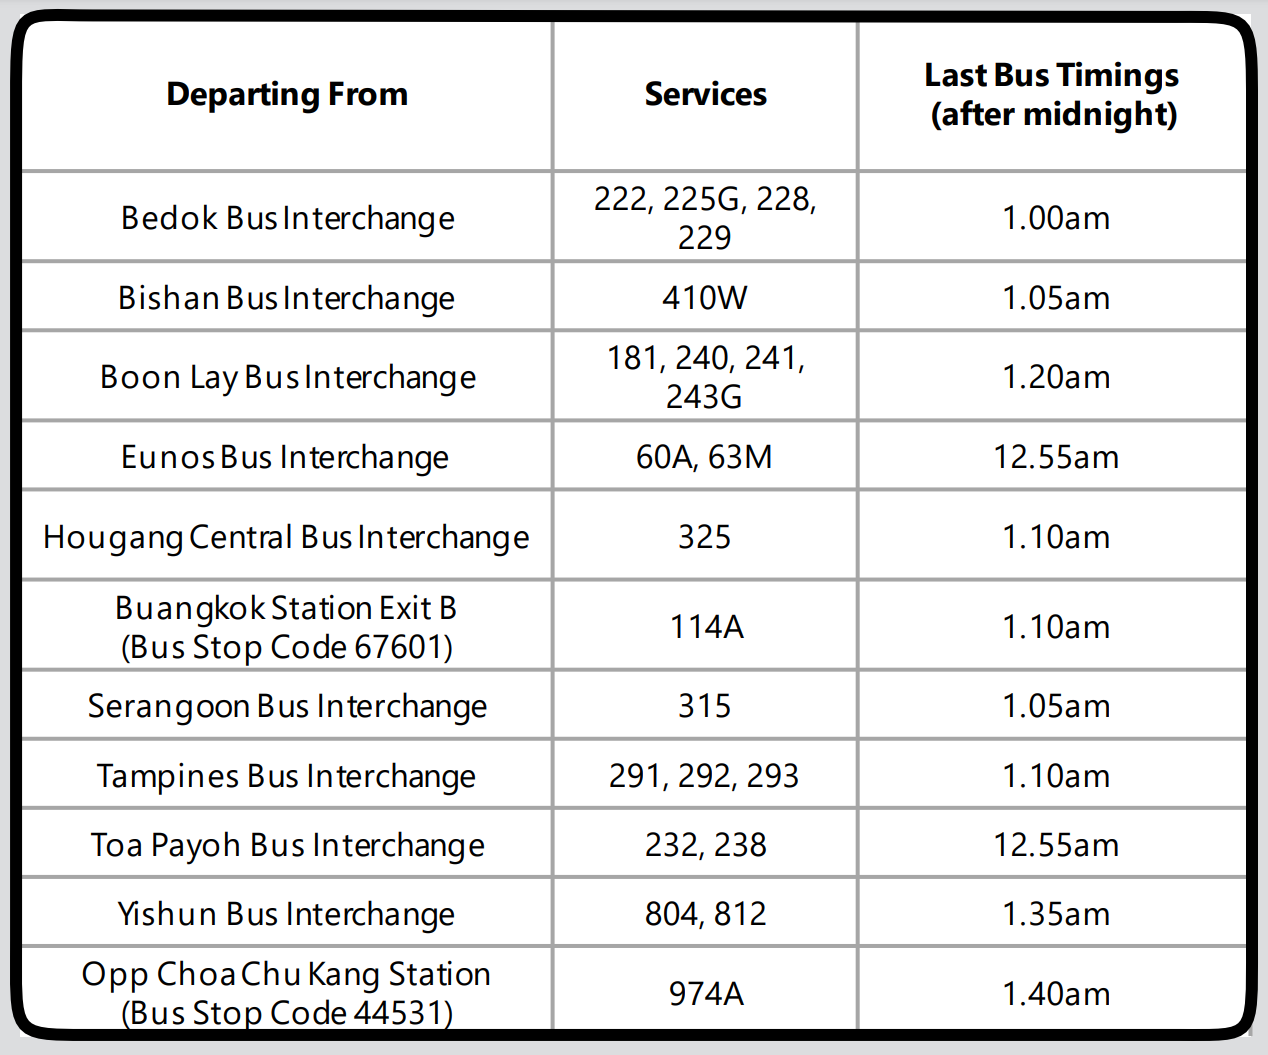 Late-Night National Day Eve? No Problem - Extended Train and Bus Timings Got You Covered!